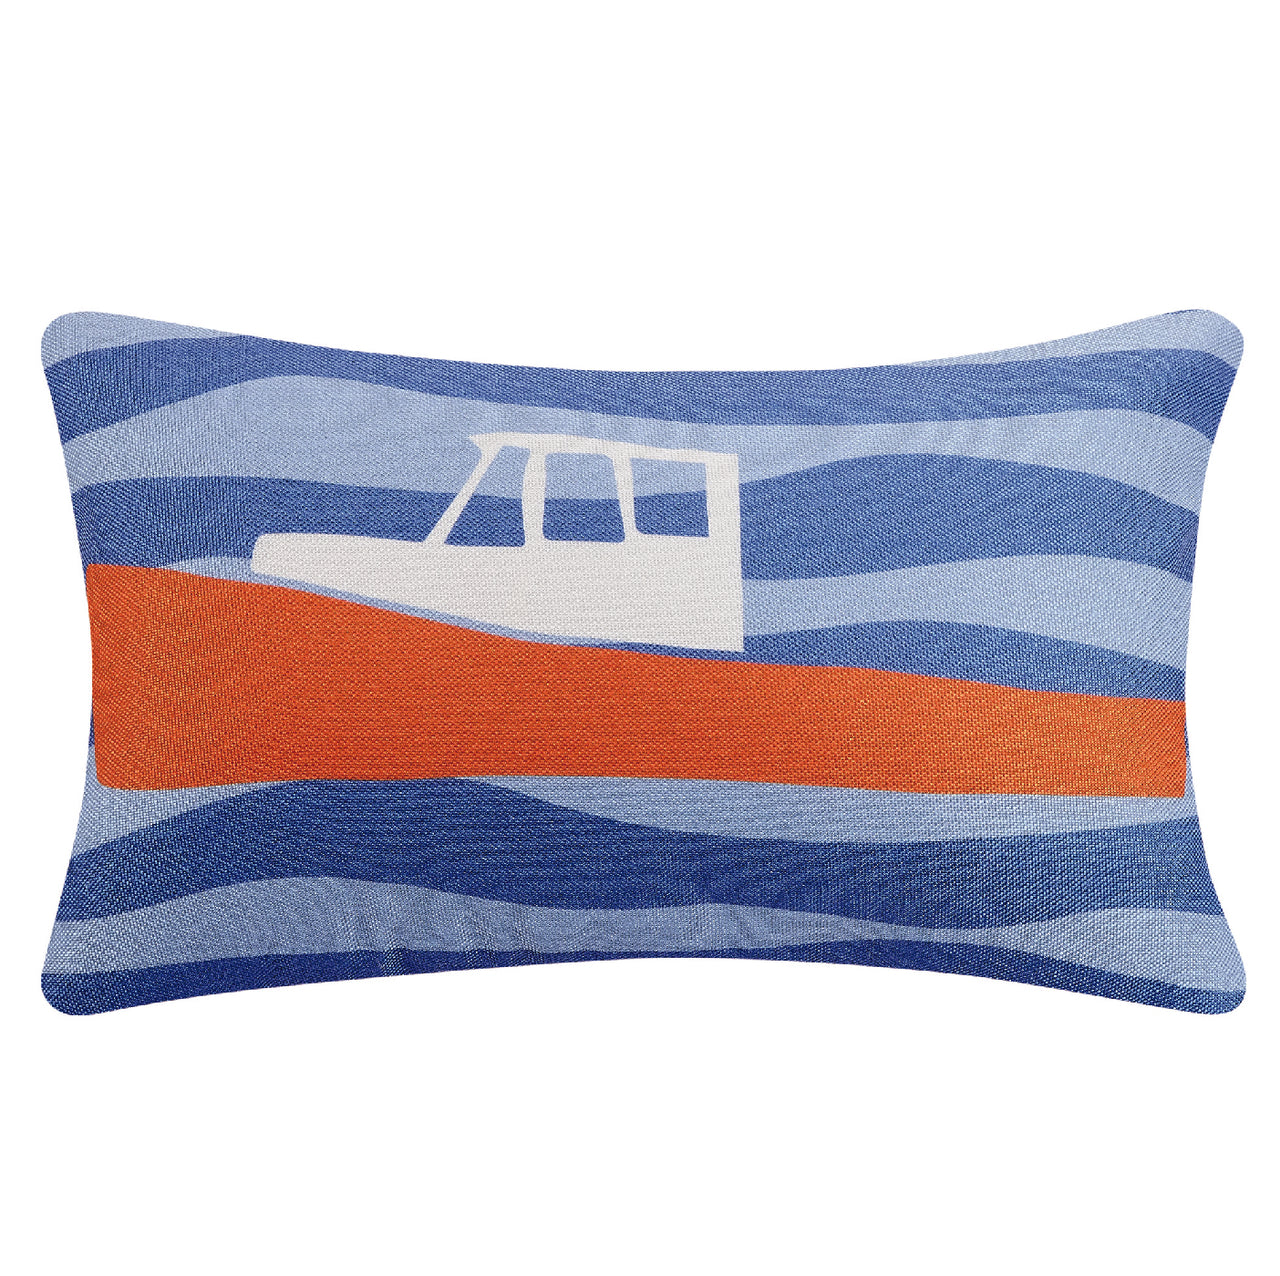 Lobster Cove Boat Printed Pillow